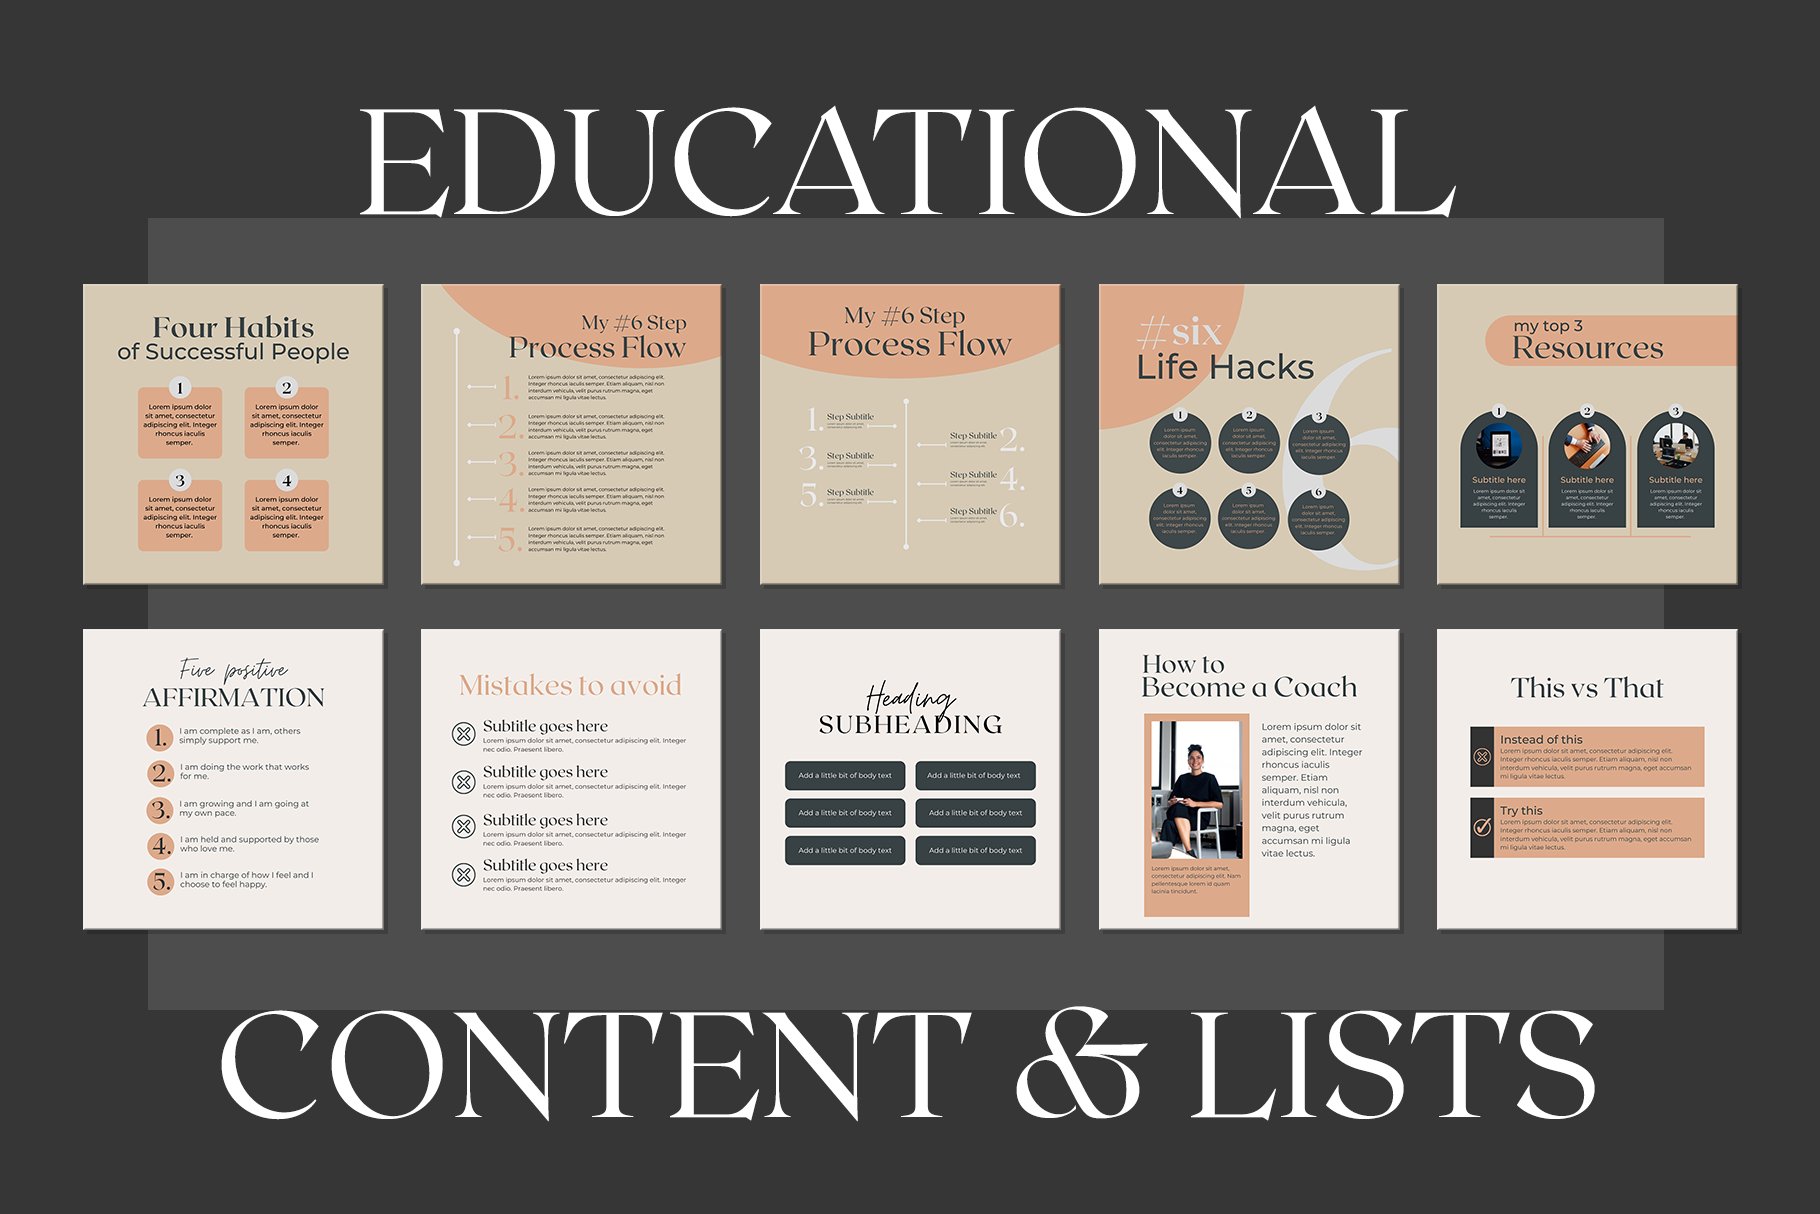 Educational content & lists.